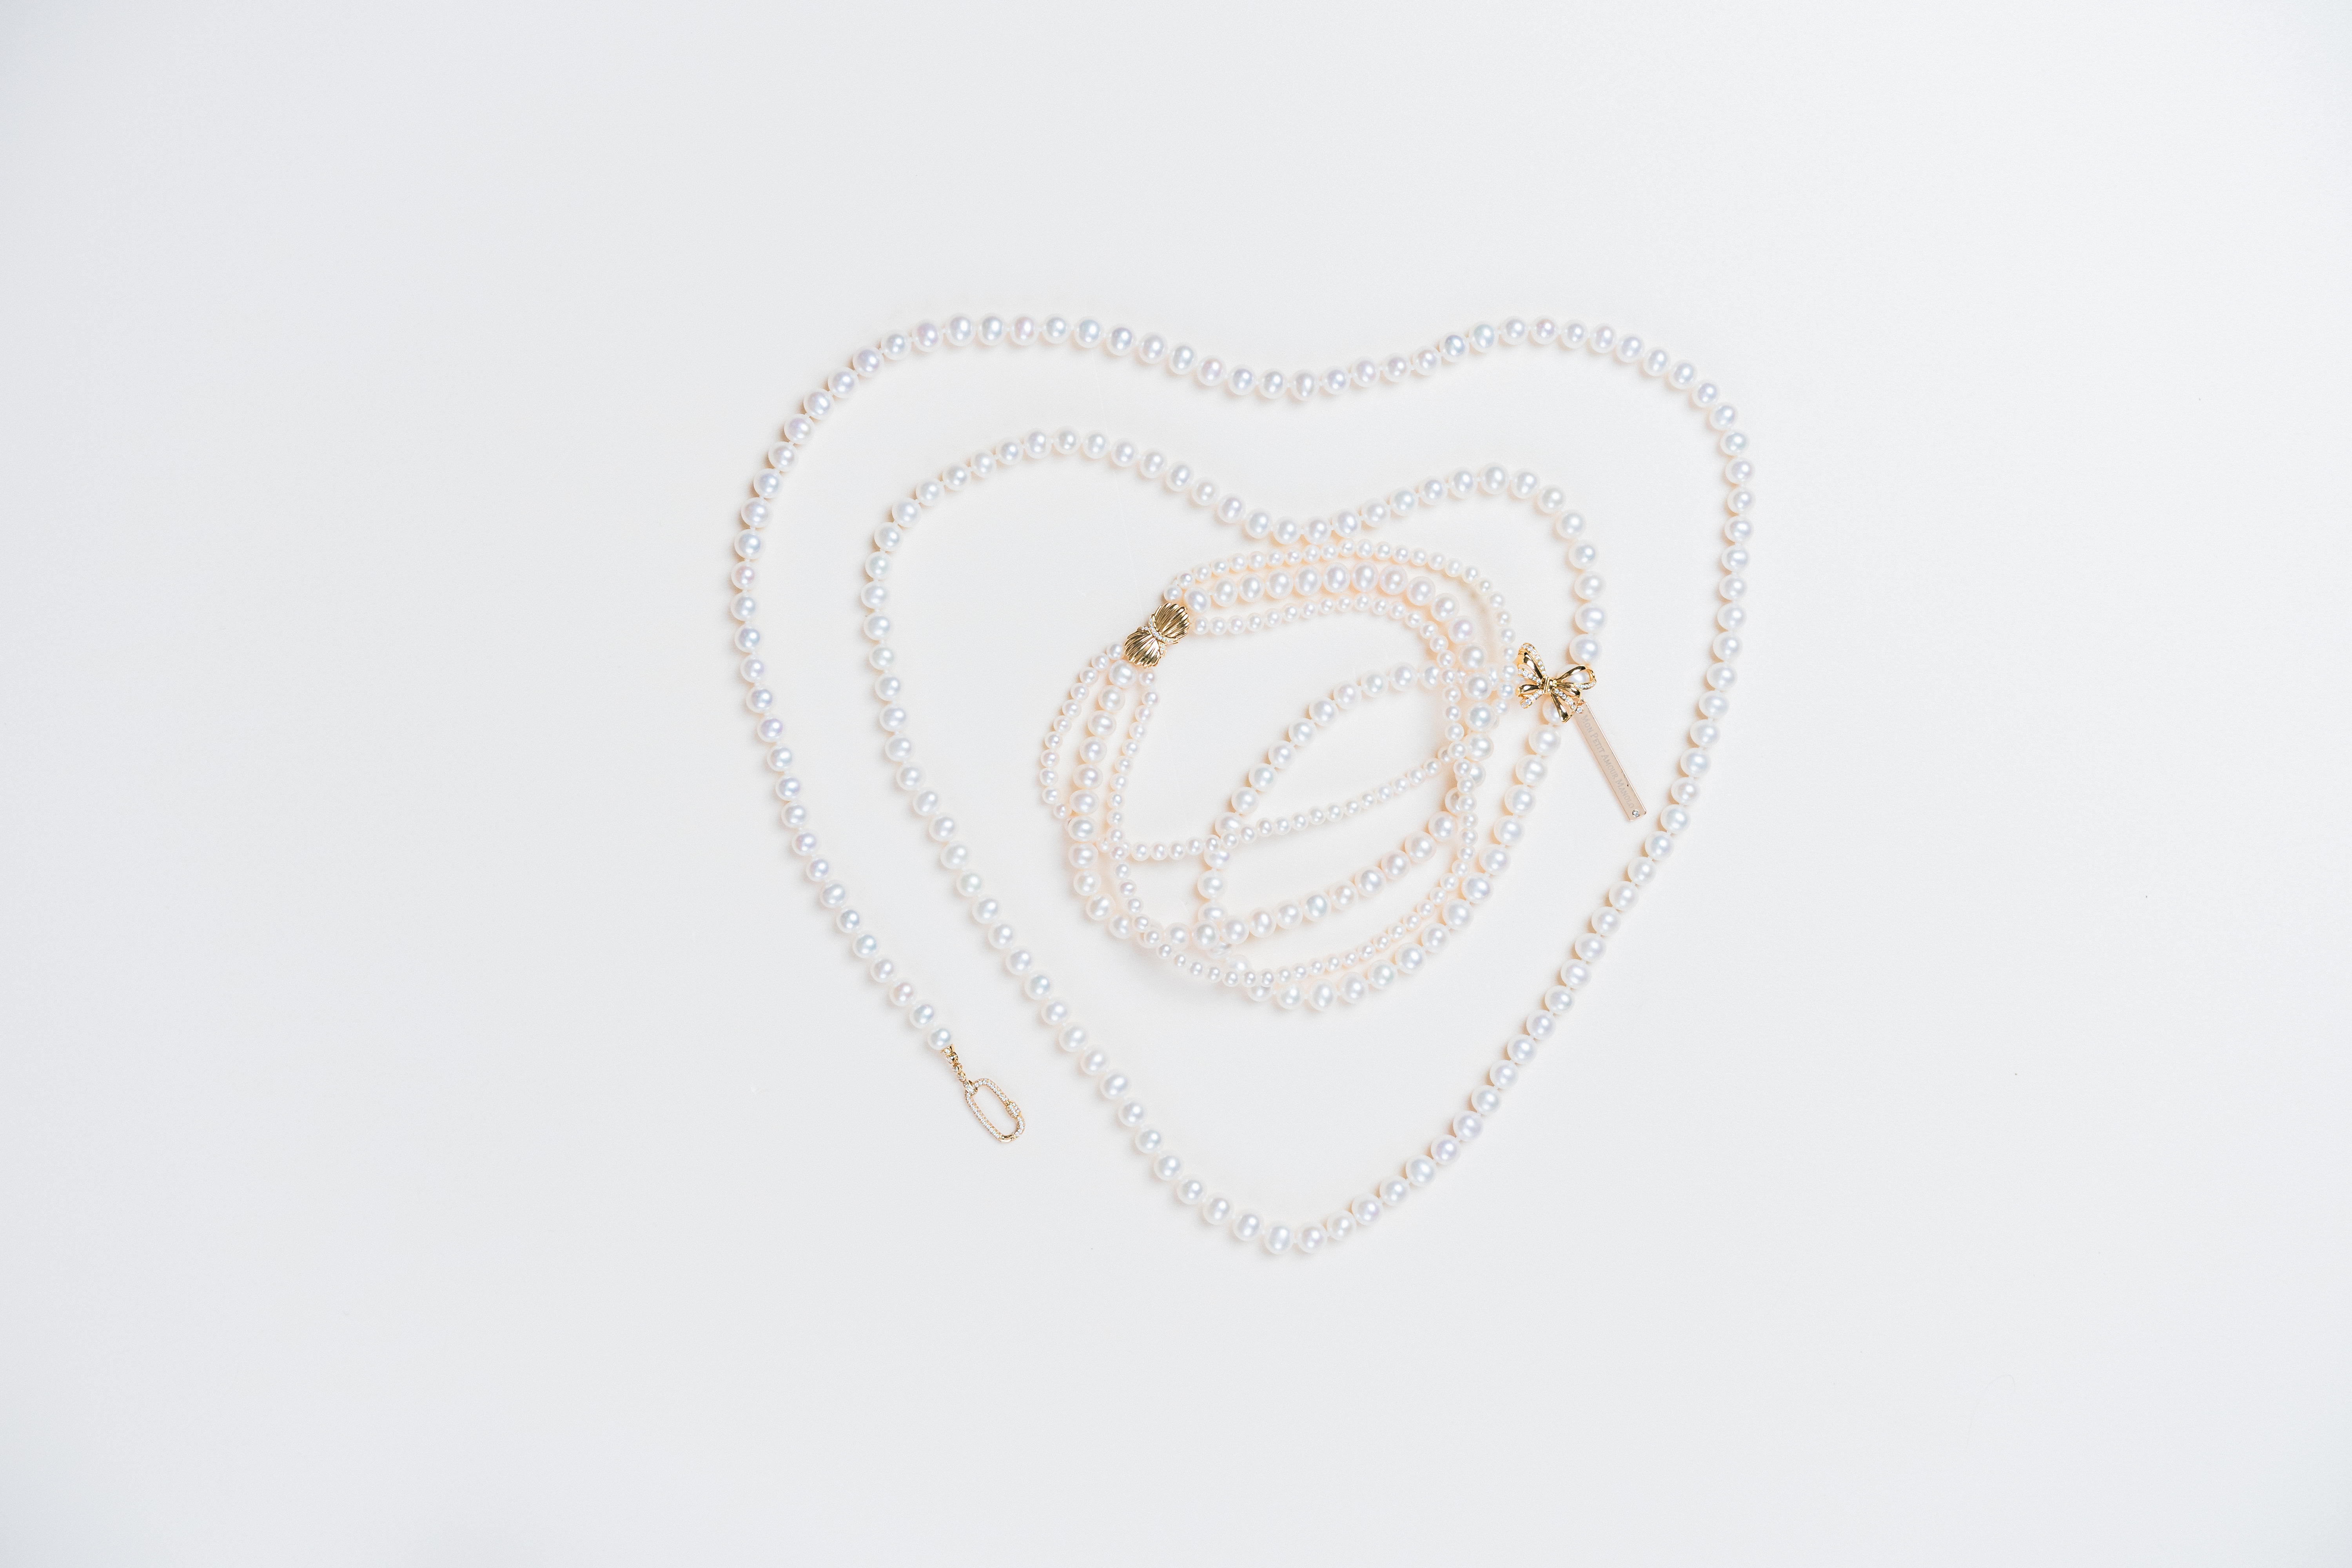 a heart shaped necklace made of pearls